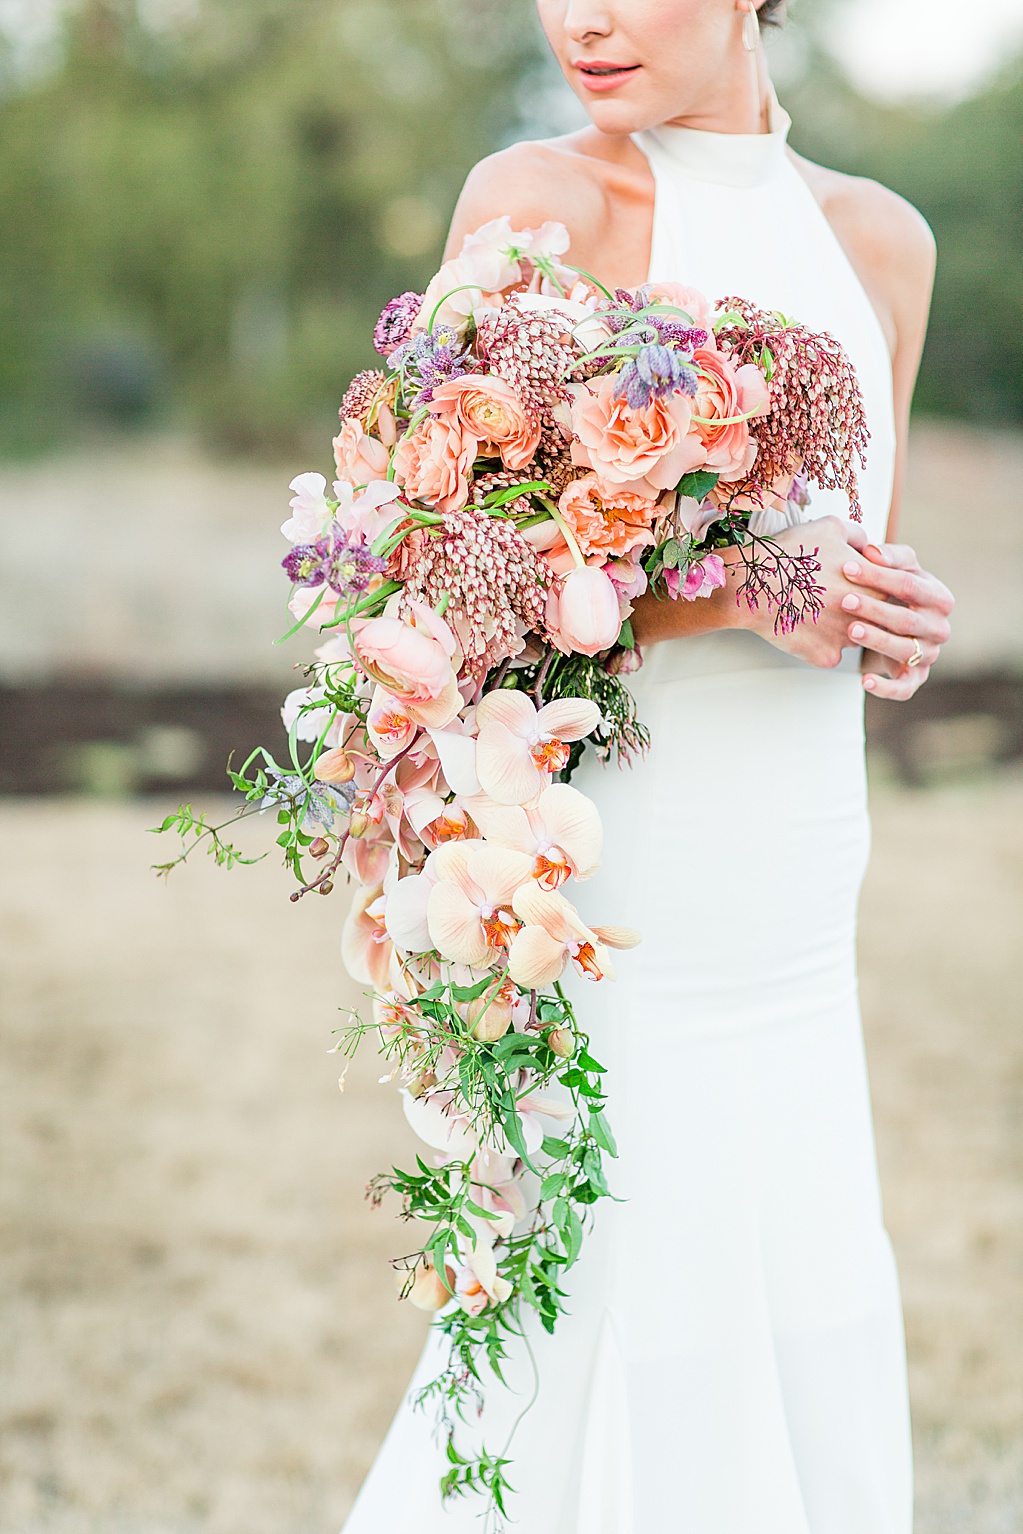 Blush mauve peach and coral wedding inspiration at Prospect House in Dripping Springs Texas wedding venue by Allison Jeffers Photography 0047